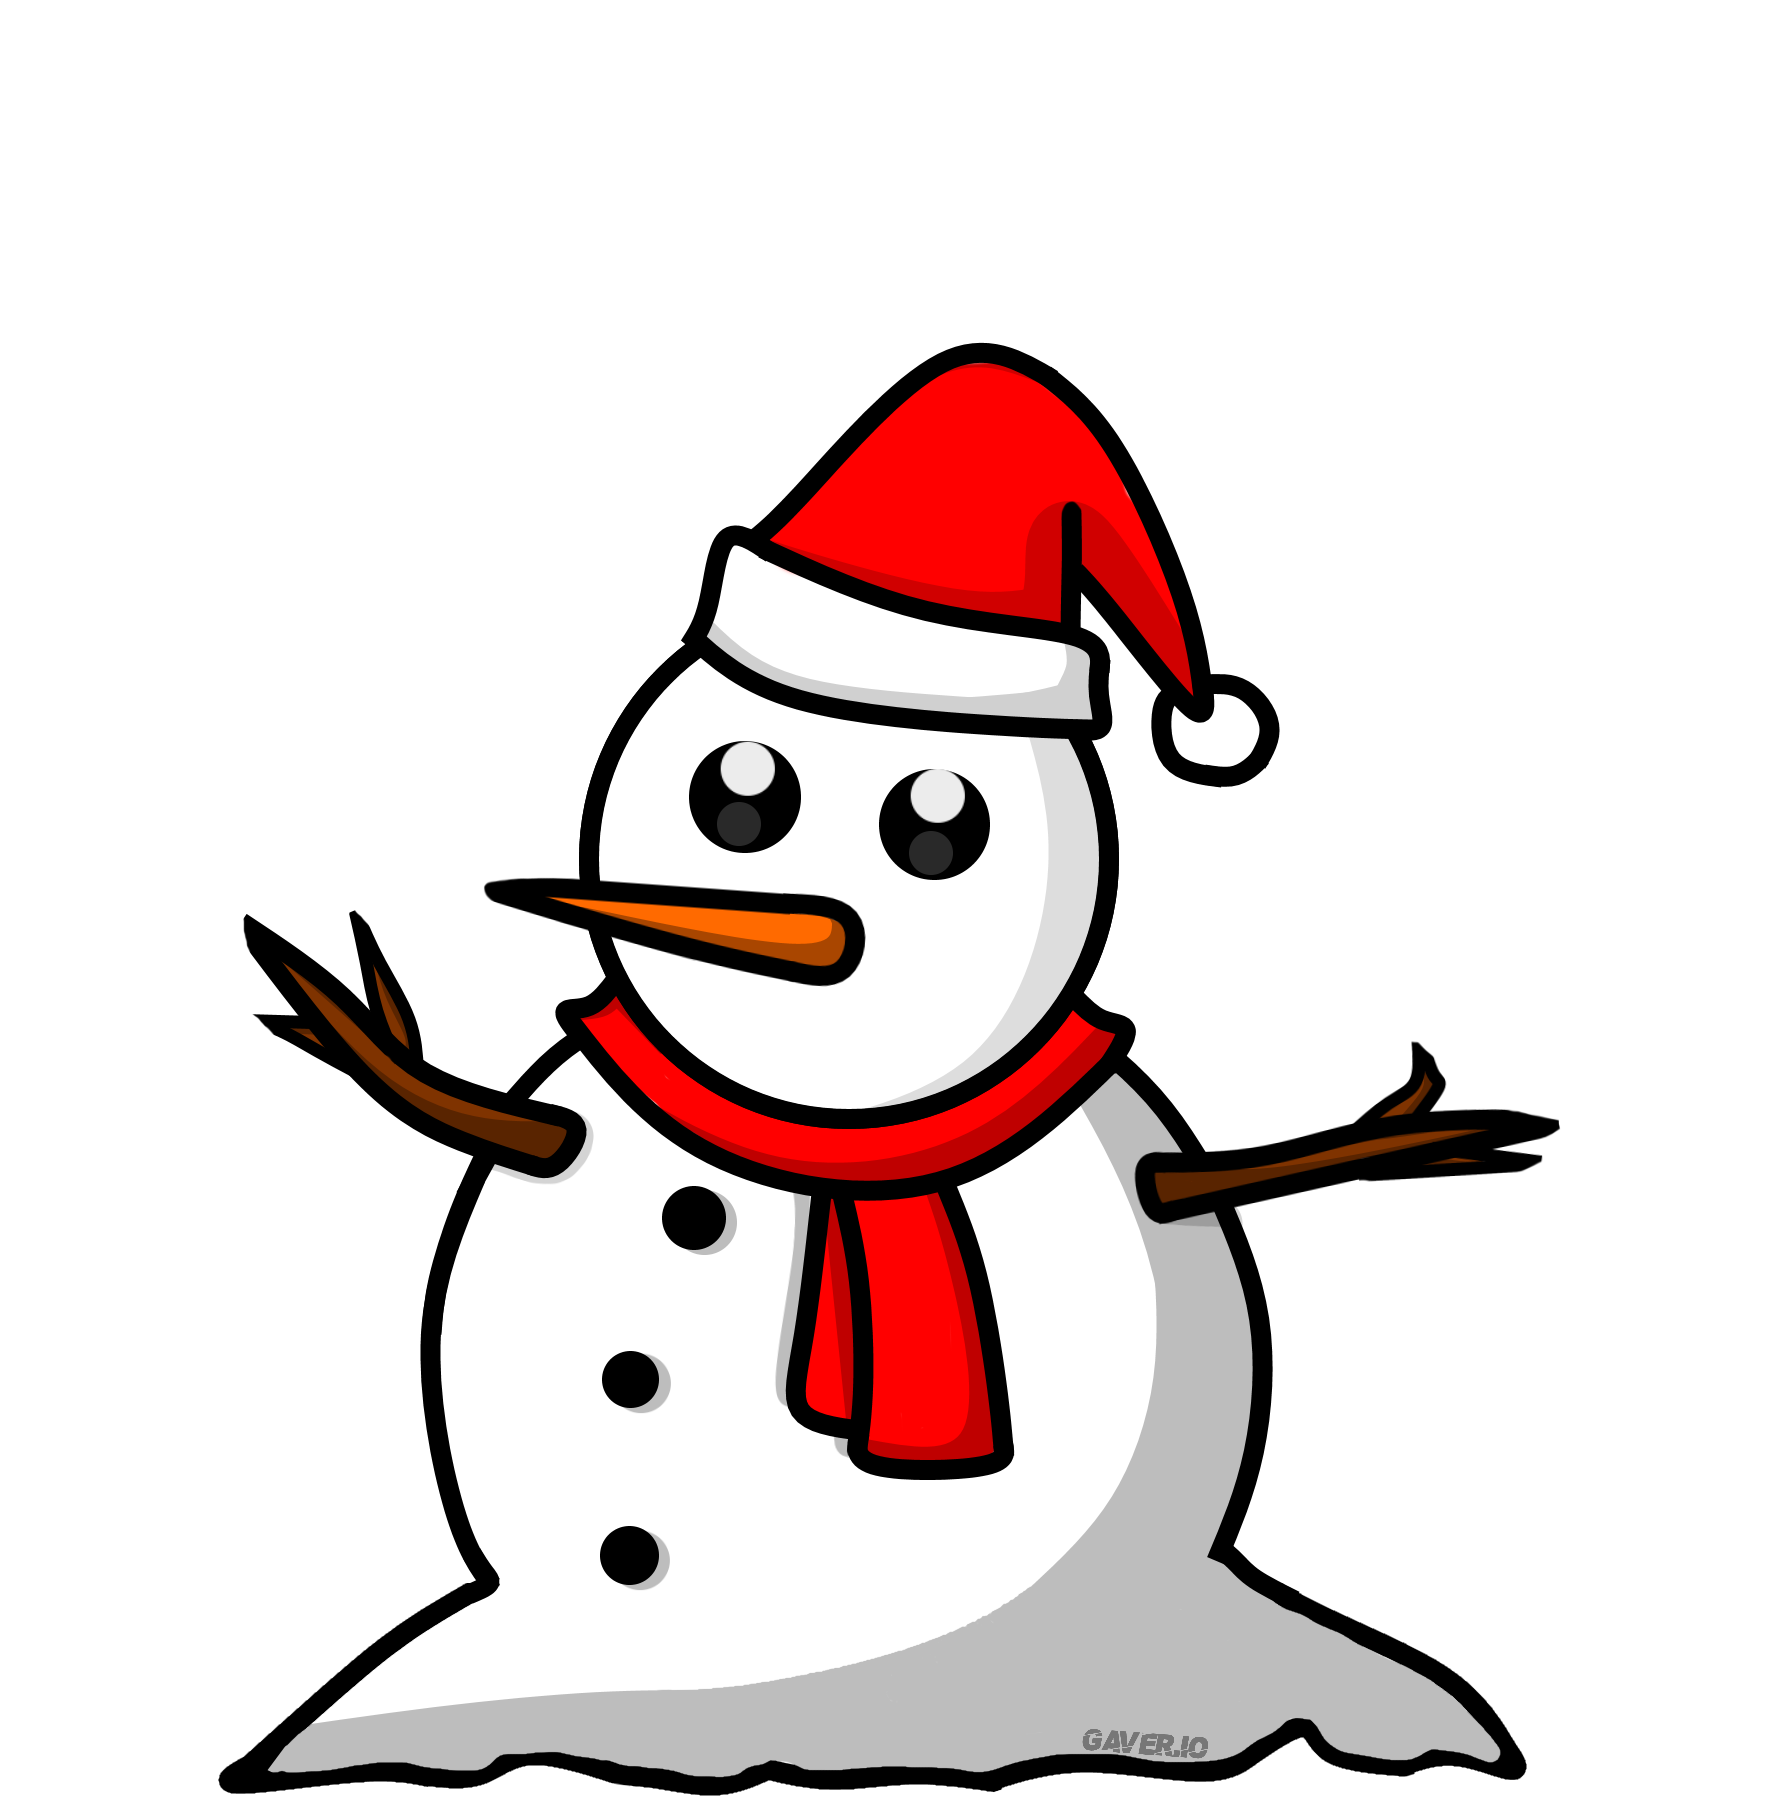 Snowman PNG Background Image